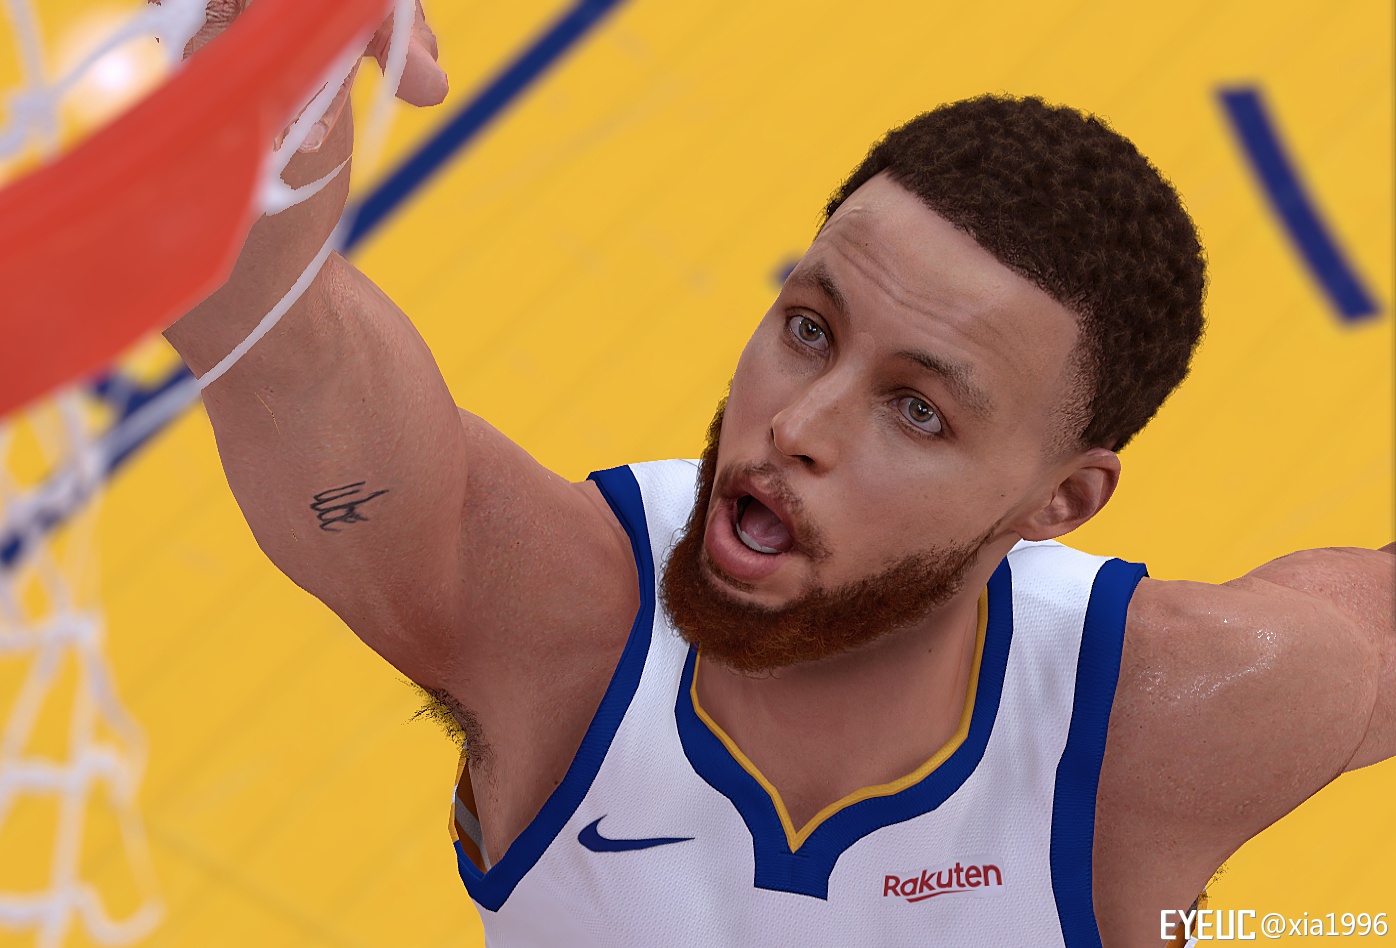 nba 2k19 cover stephen curry